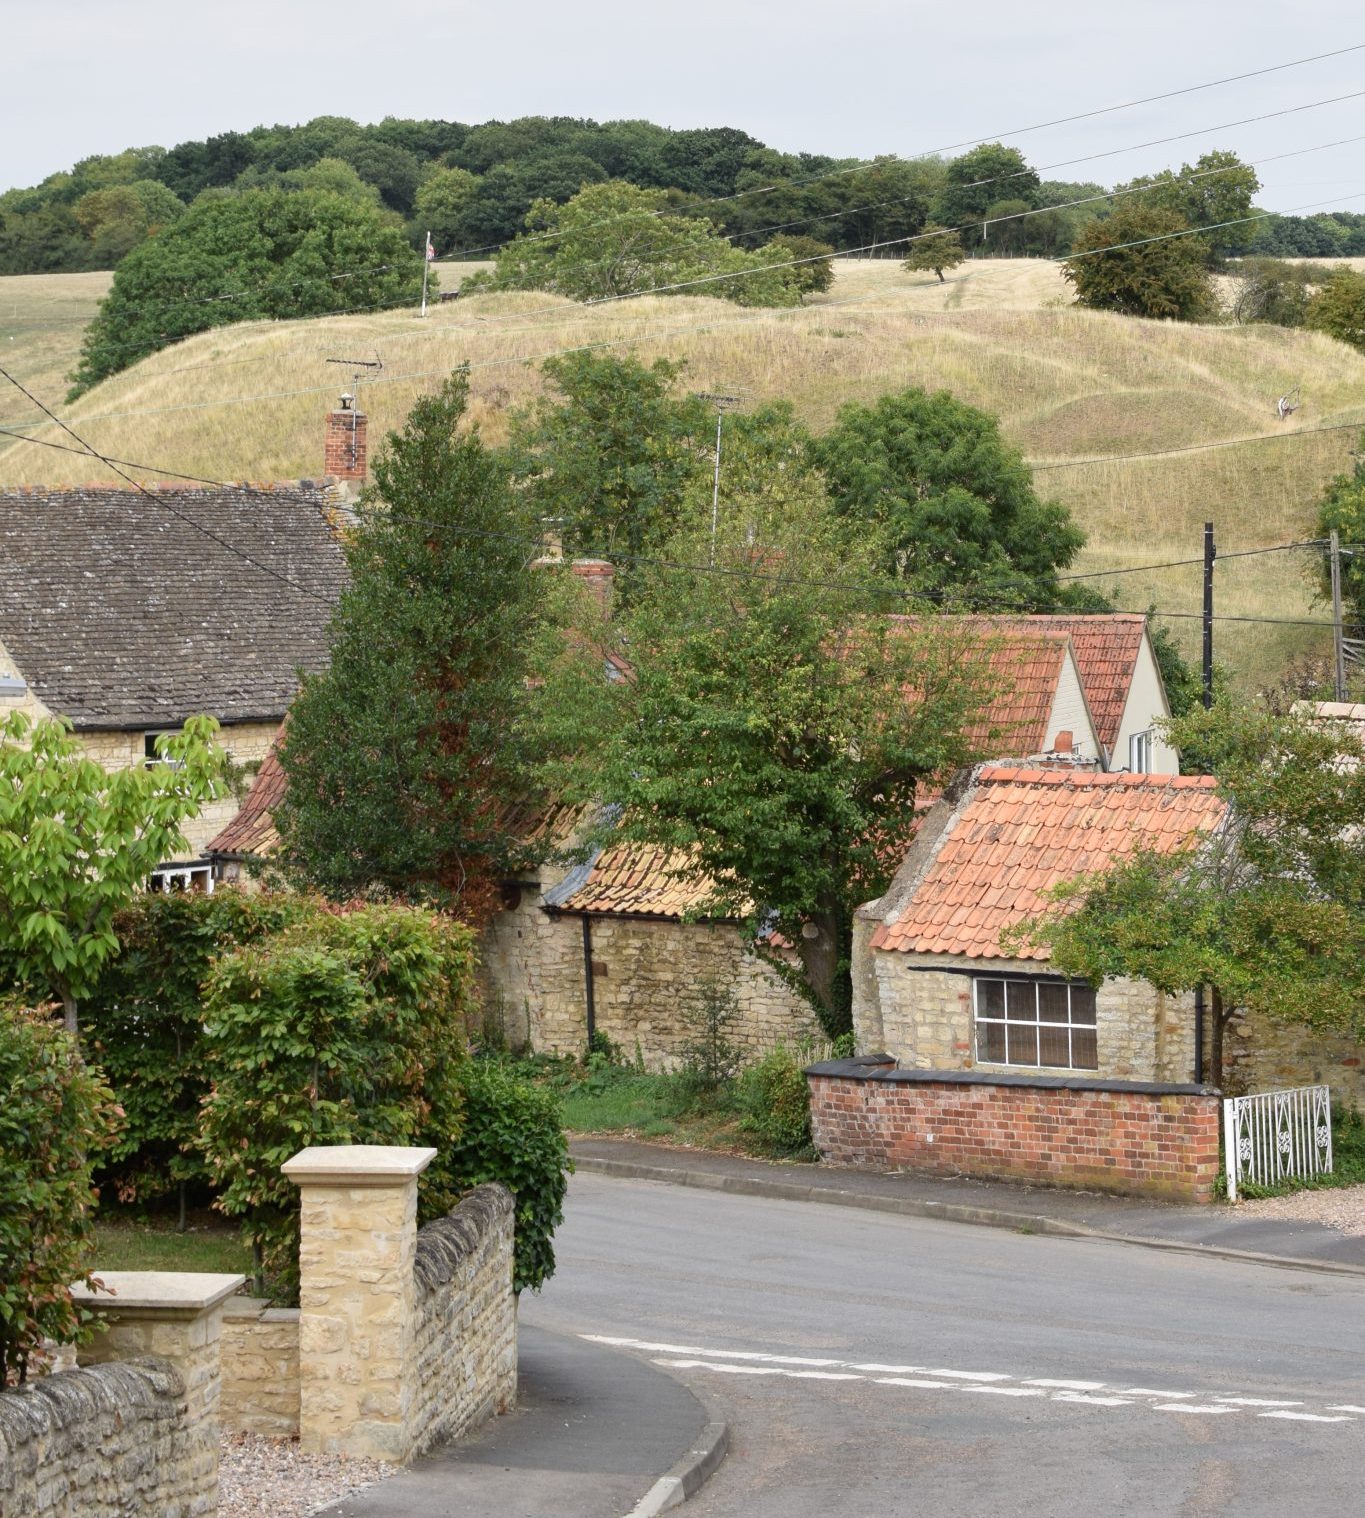 Village scene showing the earthworks of Bytham Castle rising up behind stone built houses and partially obscured by trees